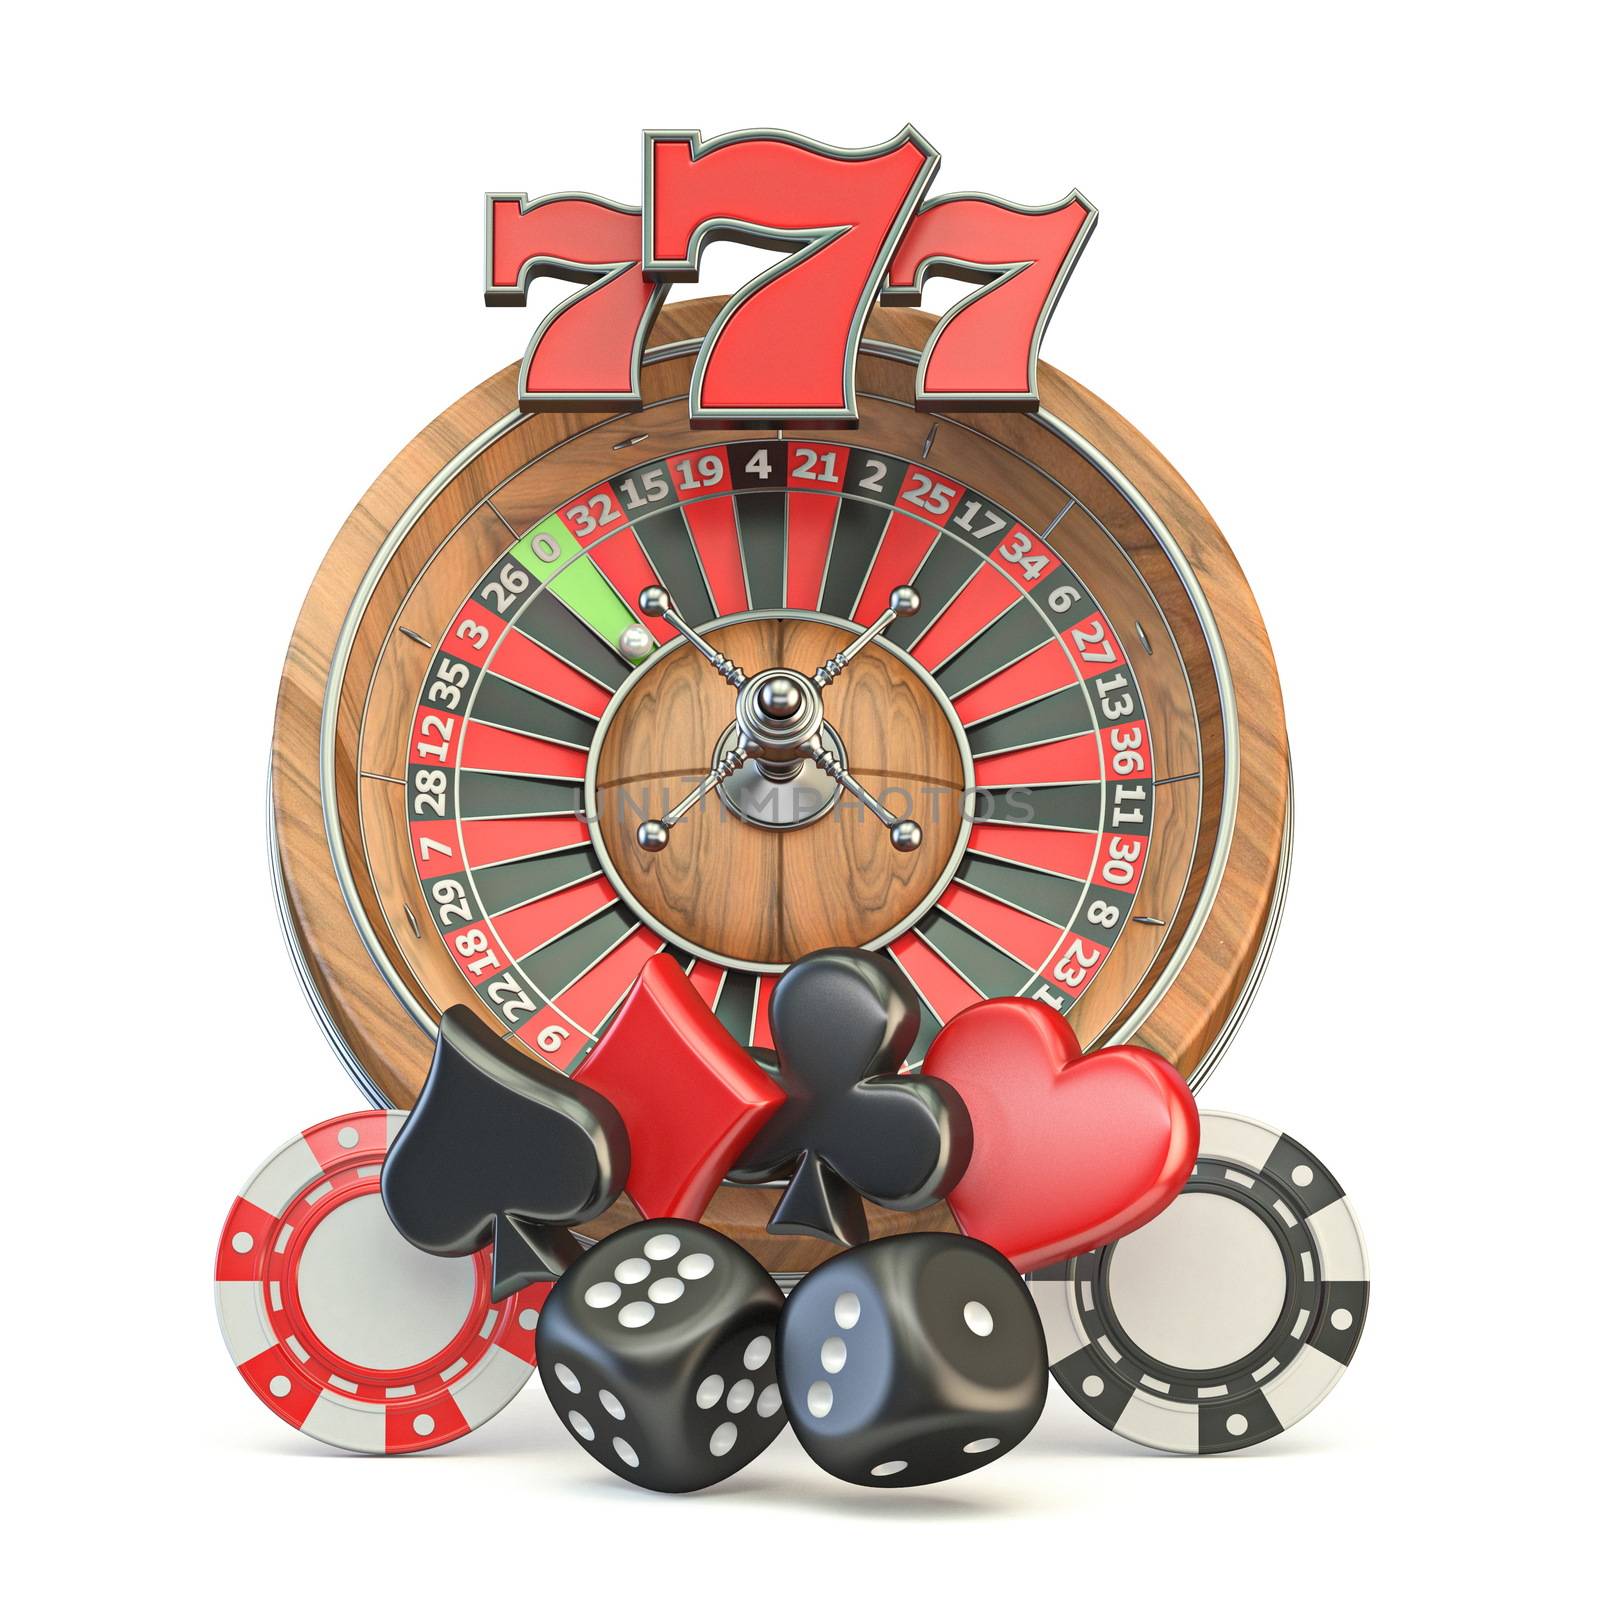 Casino concept 3D render illustration isolated on white background